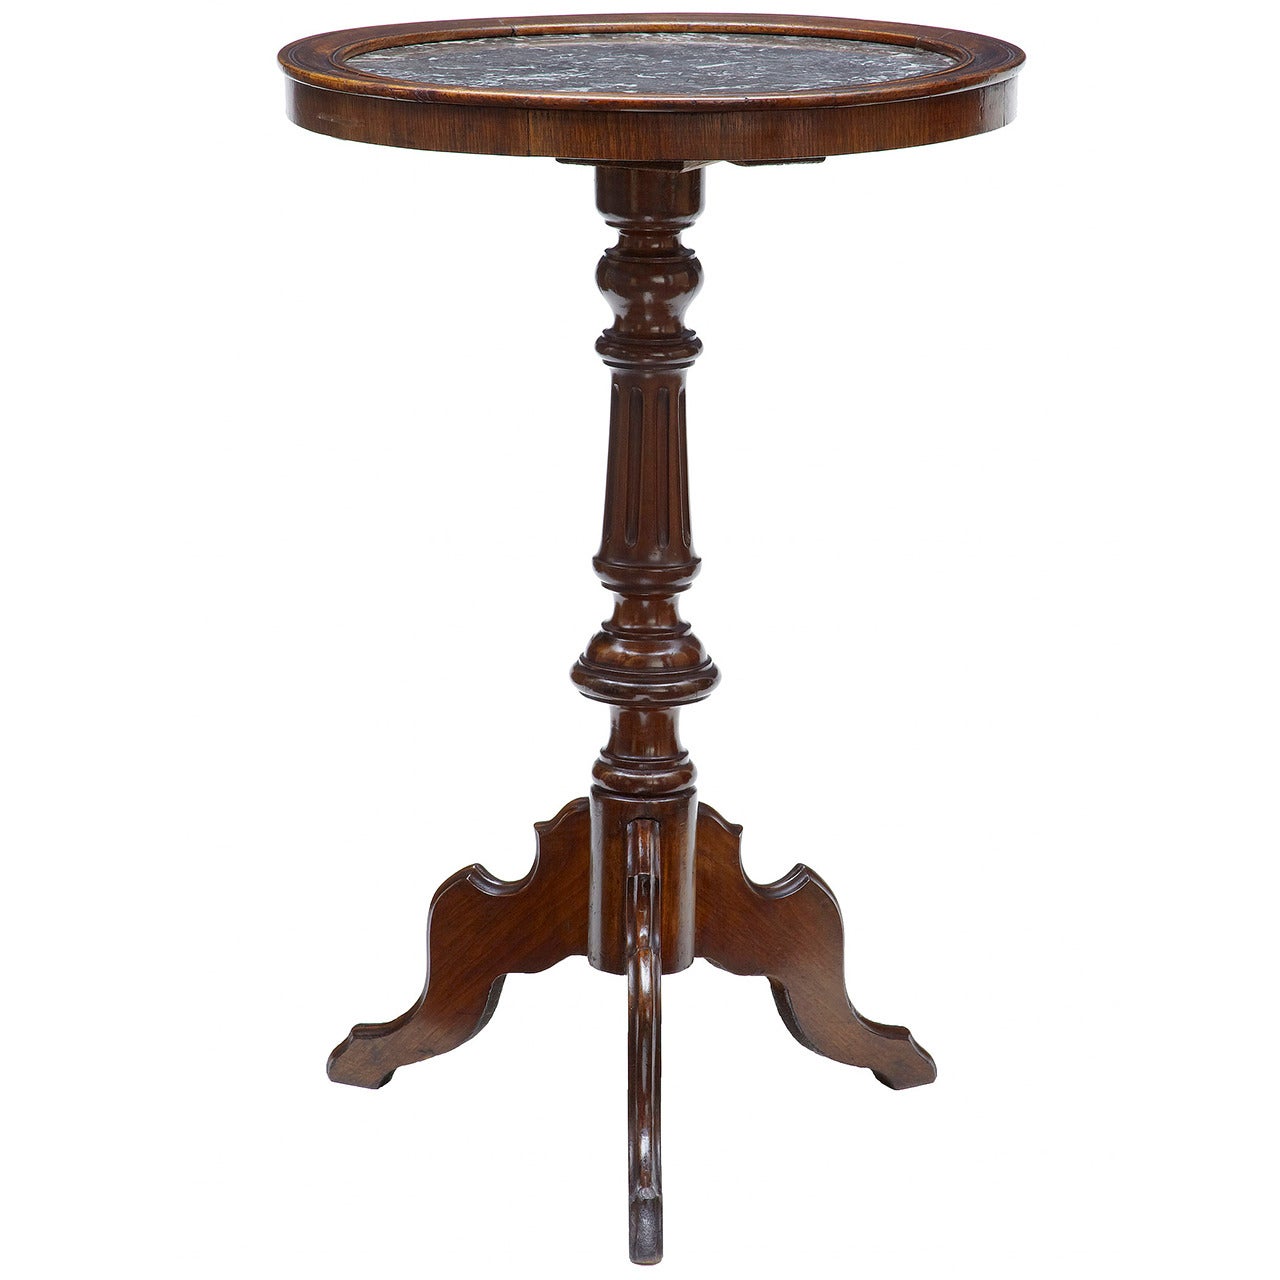 19th Century Oak and Mahogany Marble-Top Occasional Table